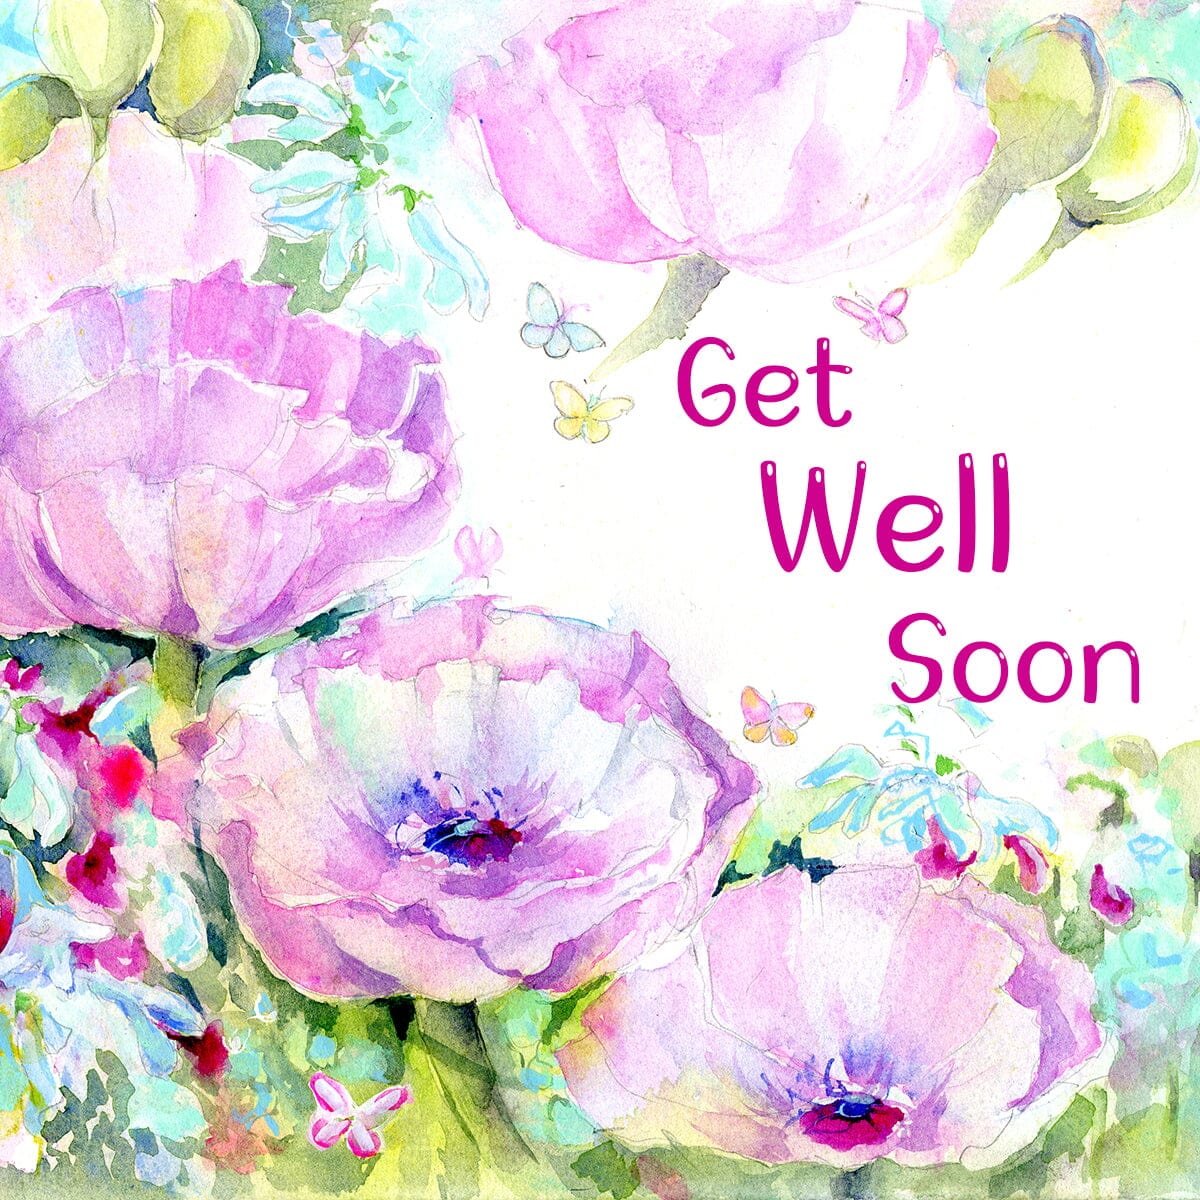 Get Well Soon Greeting Card Pink Poppies Watercolour painted designed by artist Sheila Gill